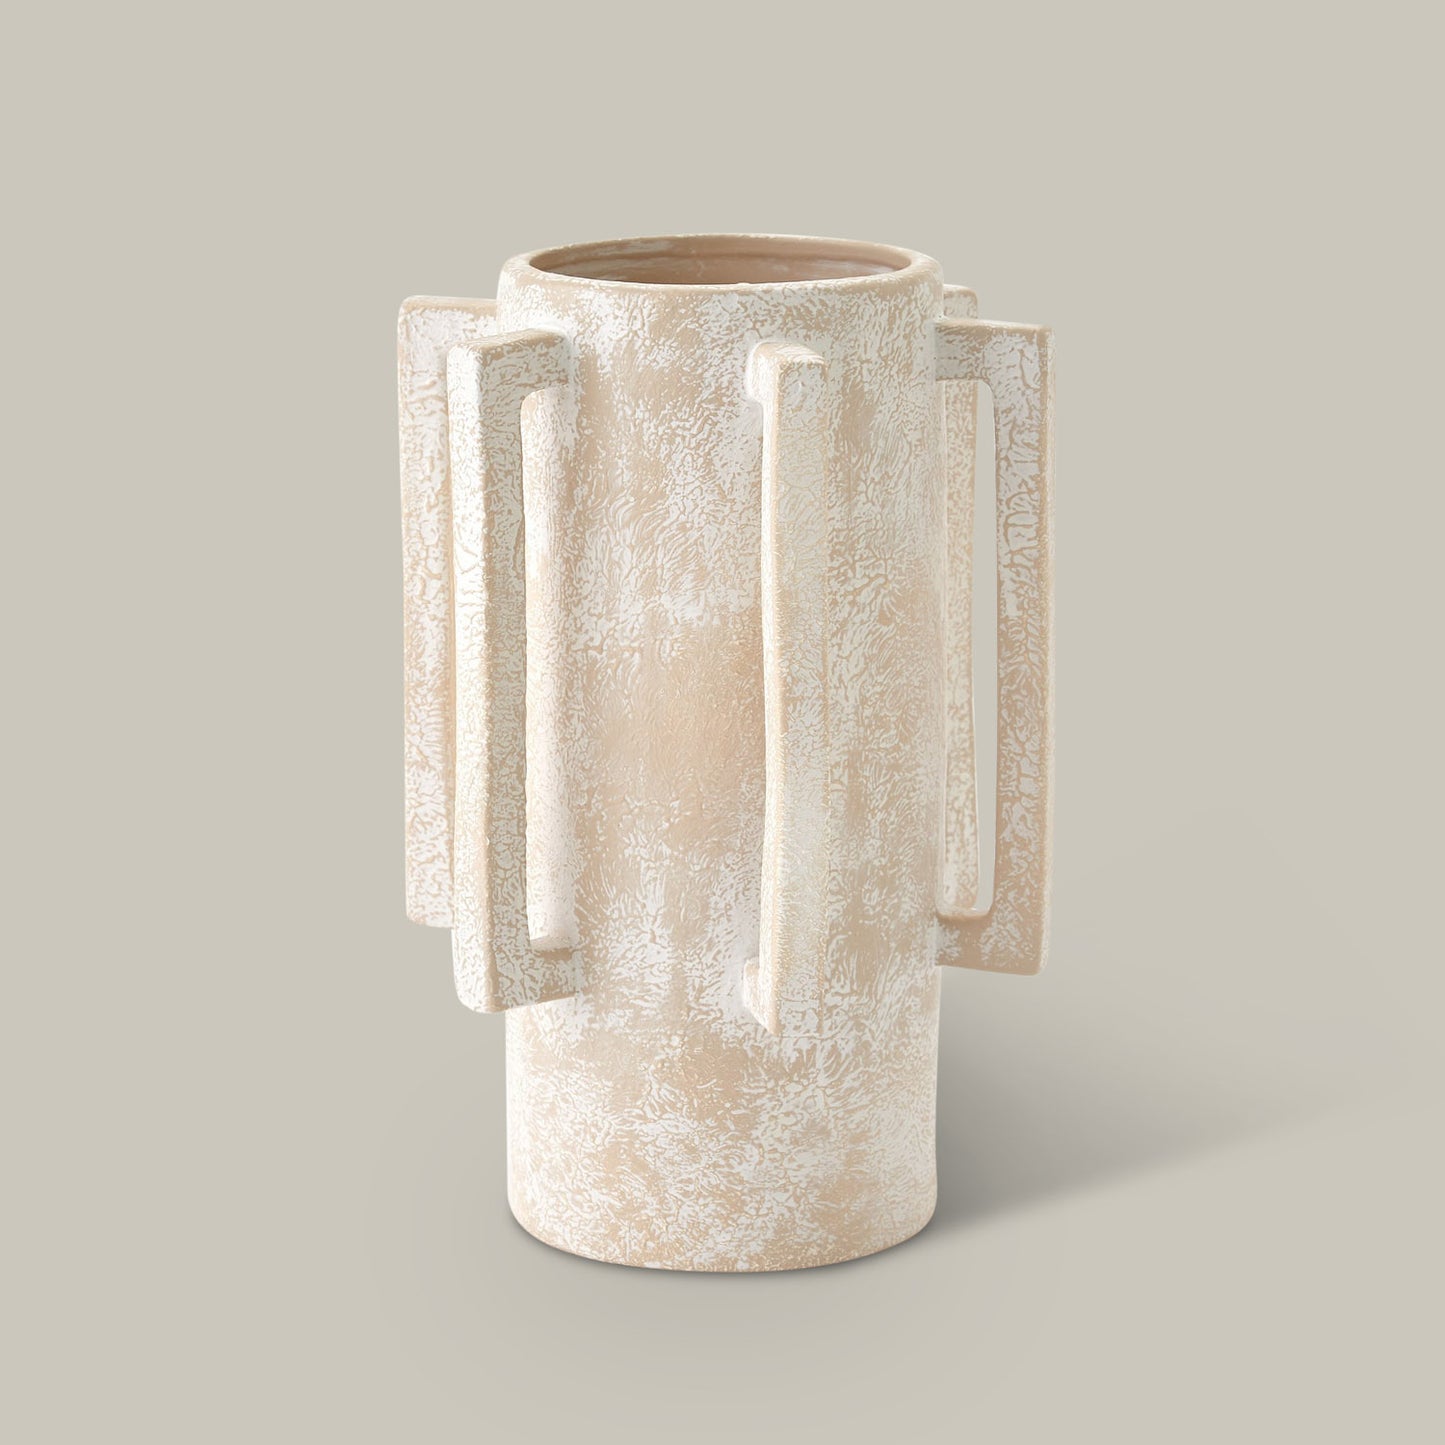 NORMANDIE AND BRETAGNE VASE COLLECTION - (NATURAL) - Preorder